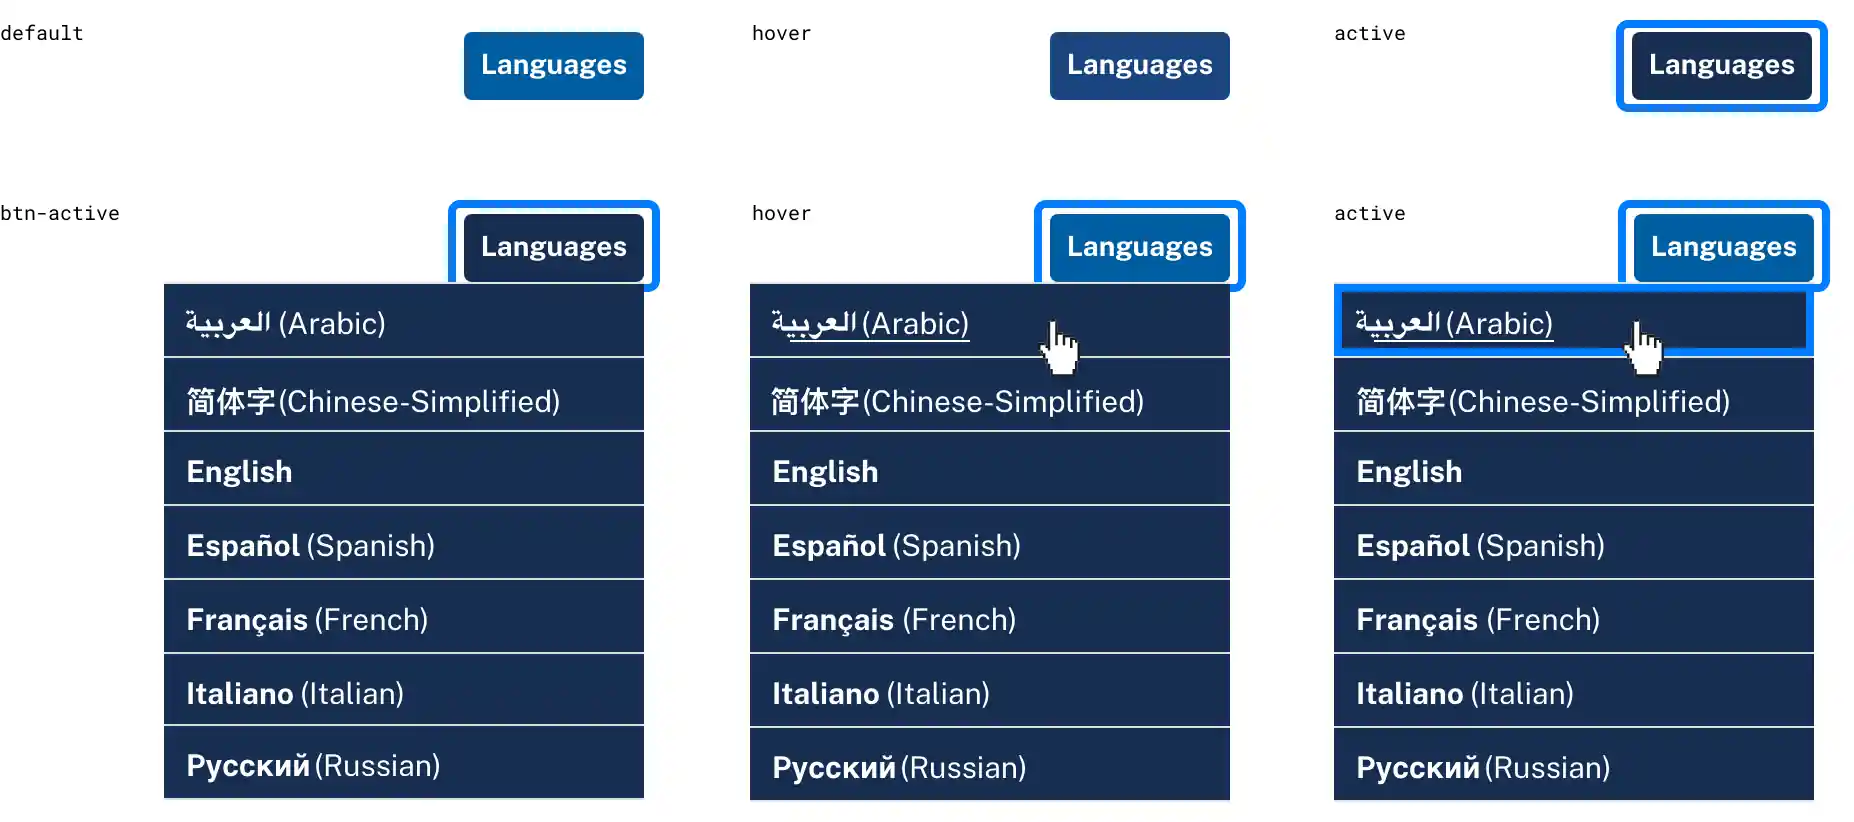 Language selector button with the text Languages shows hover state and a dropdown menu with language options. The selected language in the dropdown is underlined on hover.